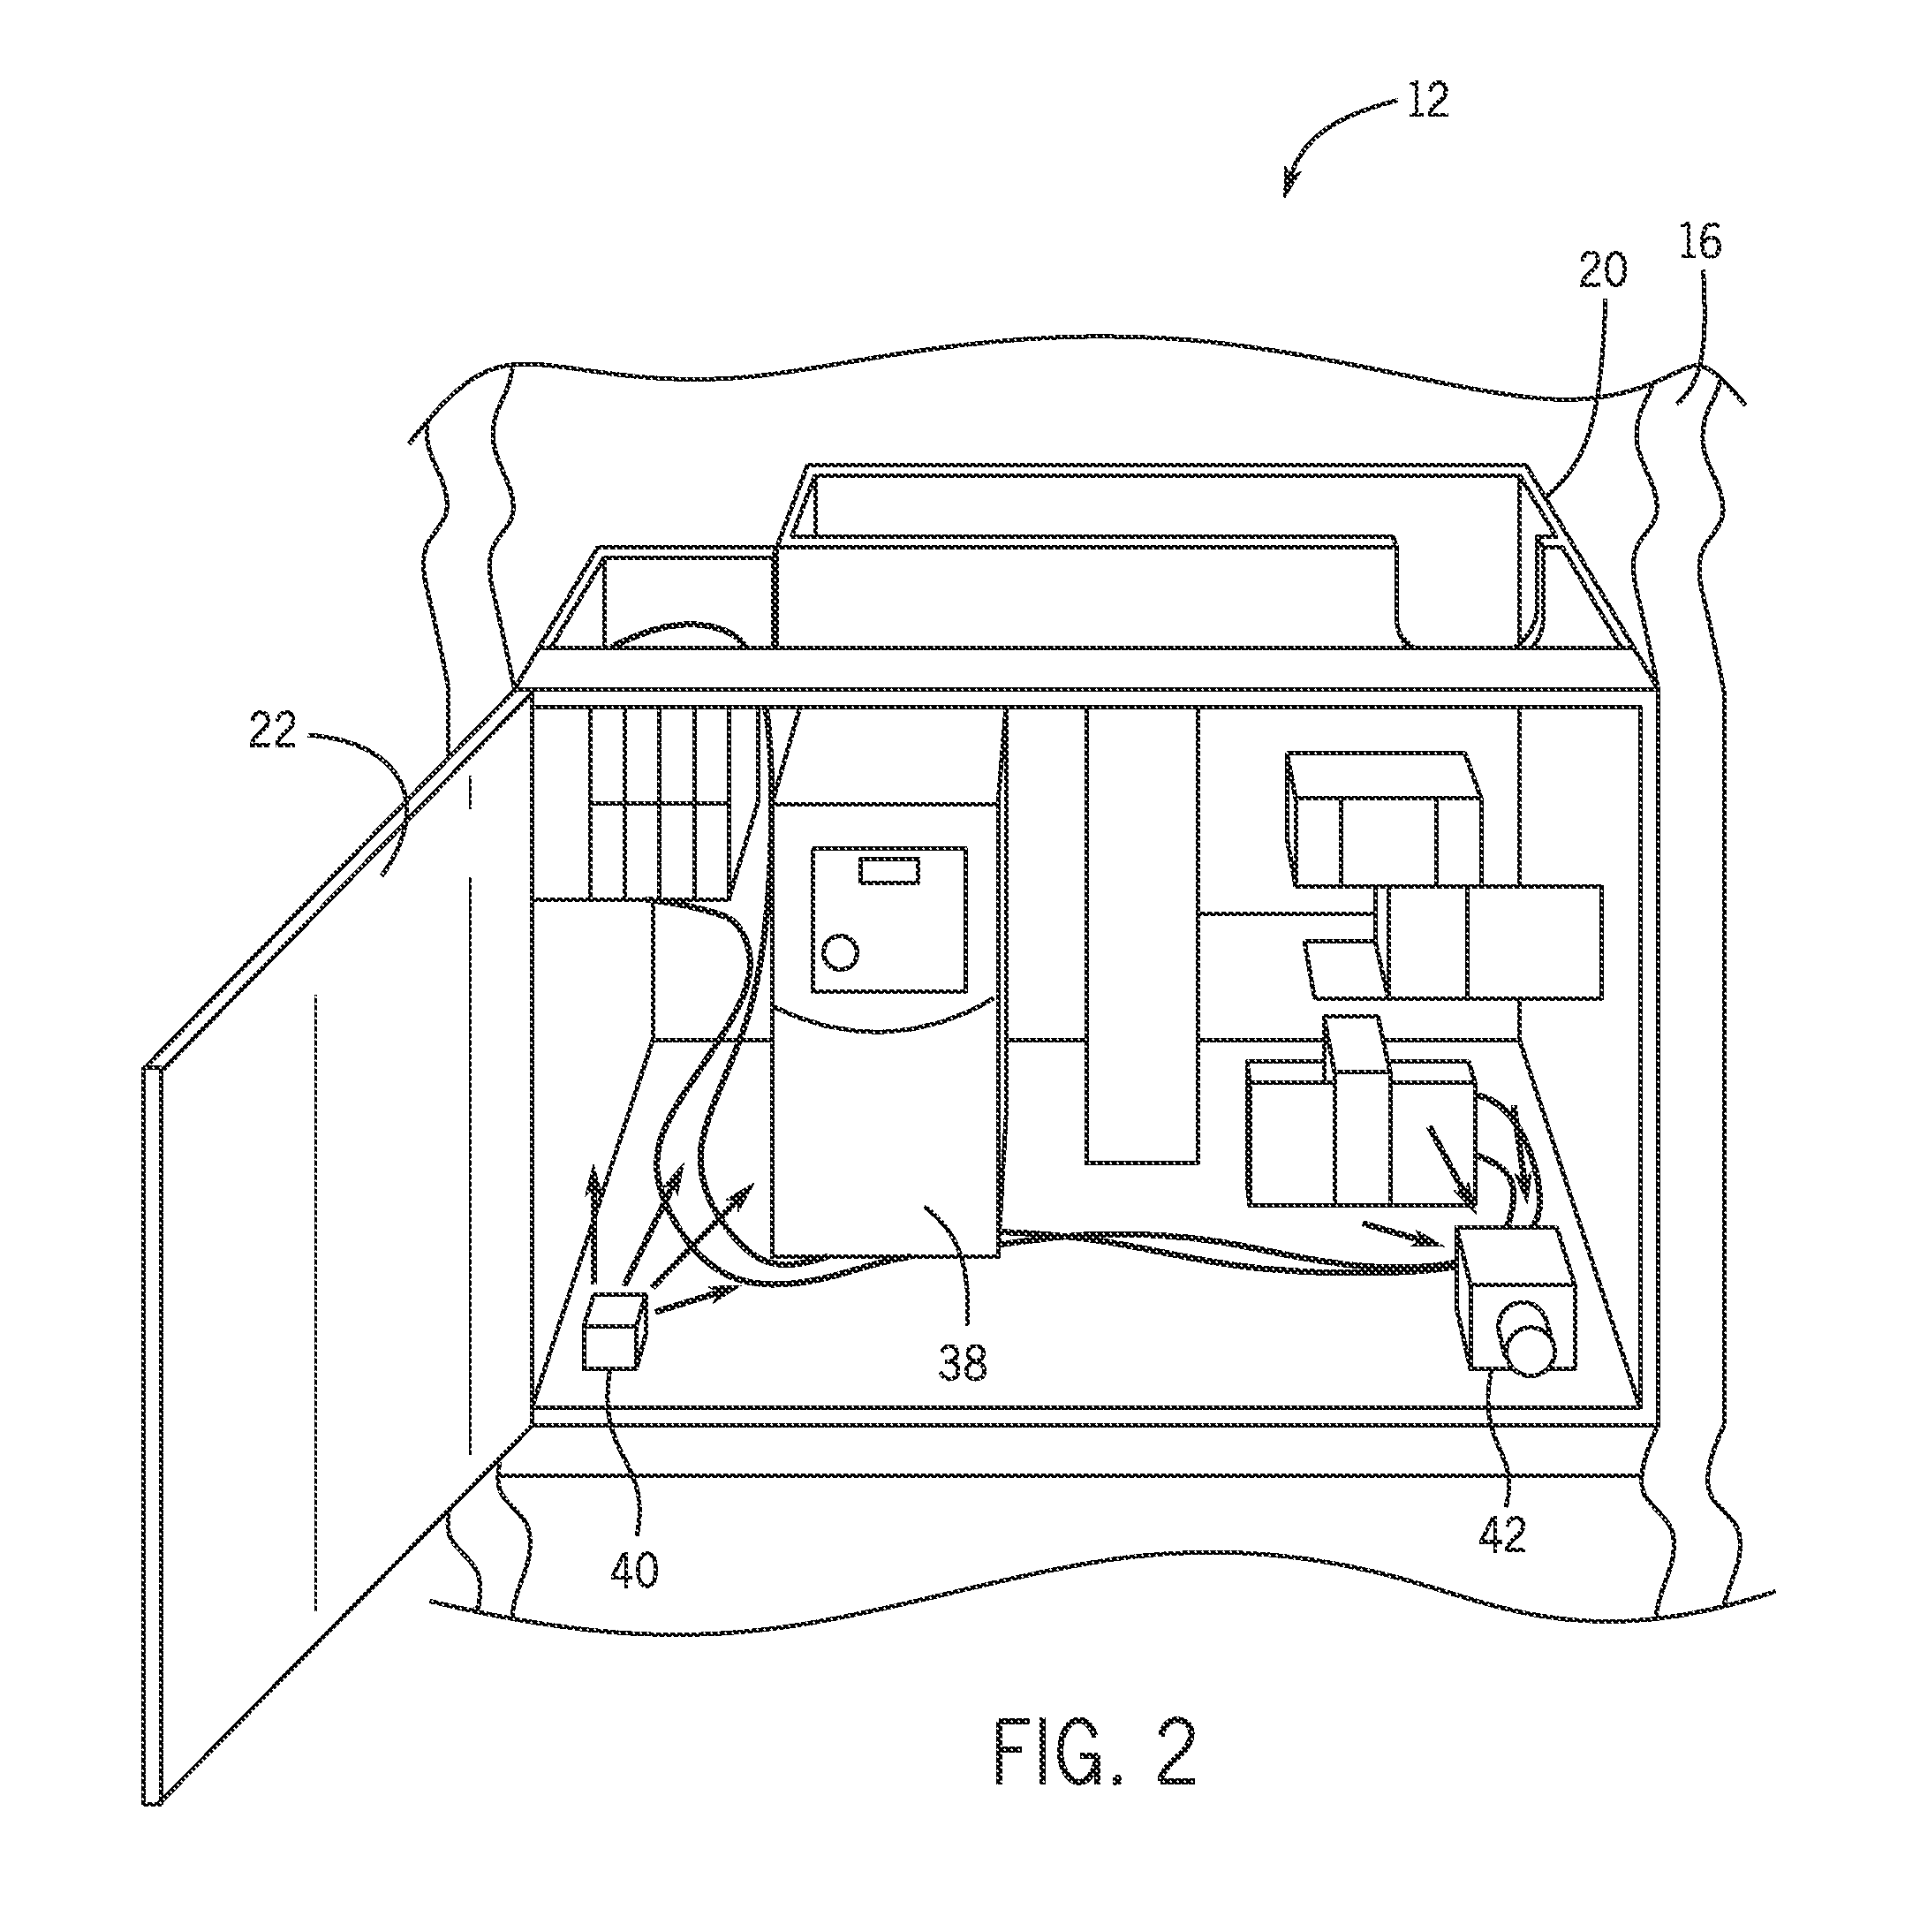 Electrical component remote temperature monitoring system and method